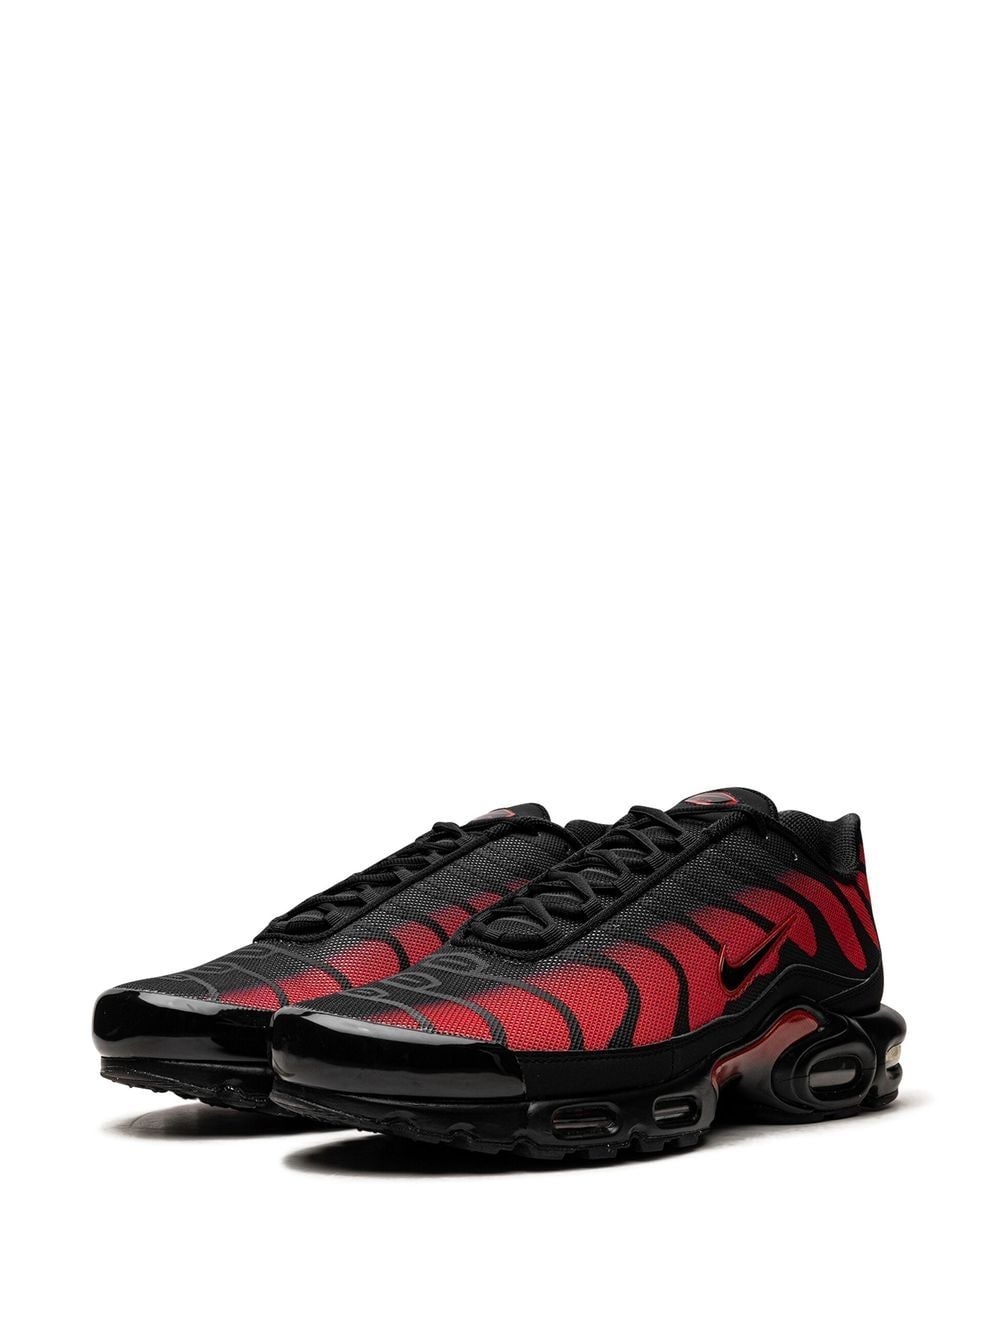 Air Max Plus "Bred Reflective" sneakers - 5